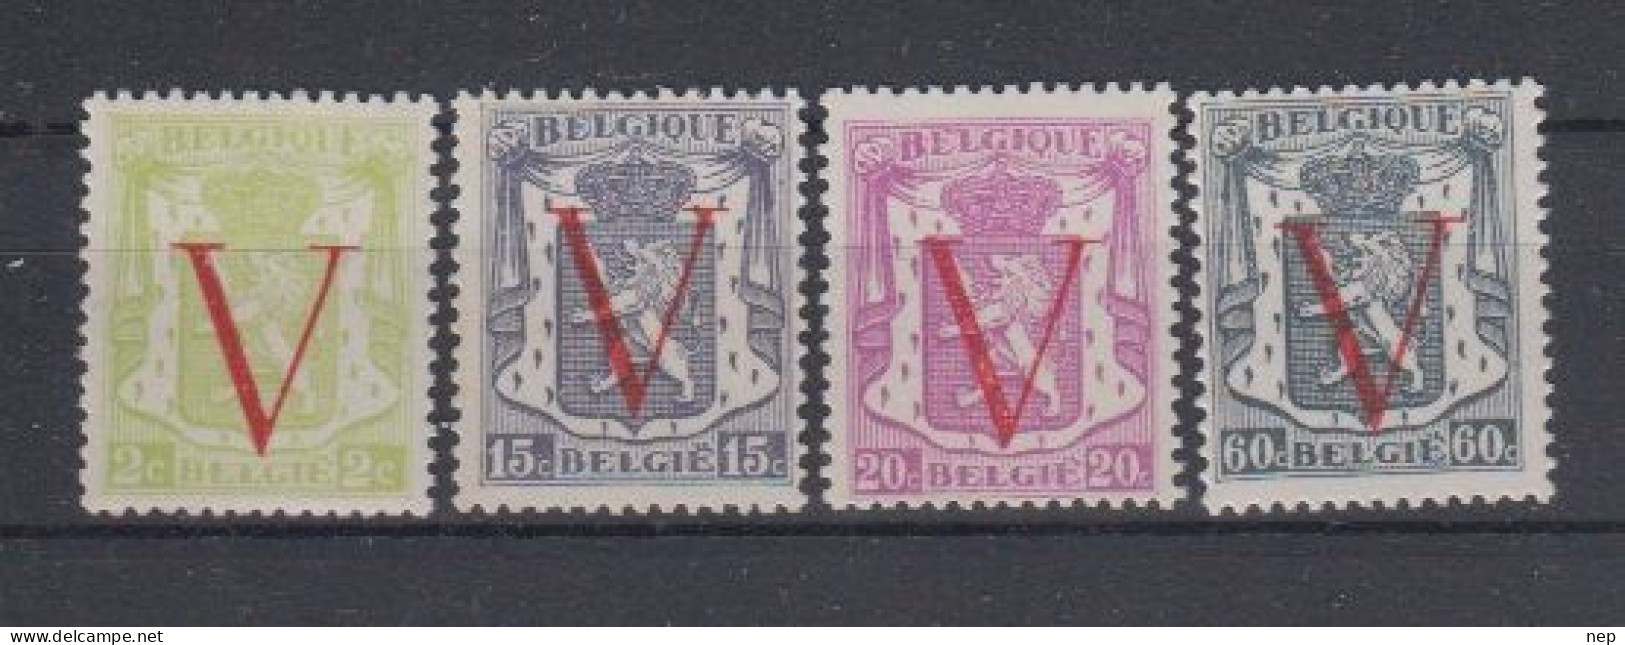 BELGIË - OBP -  1944 - Nr 670/73 - MNH** - 1935-1949 Small Seal Of The State